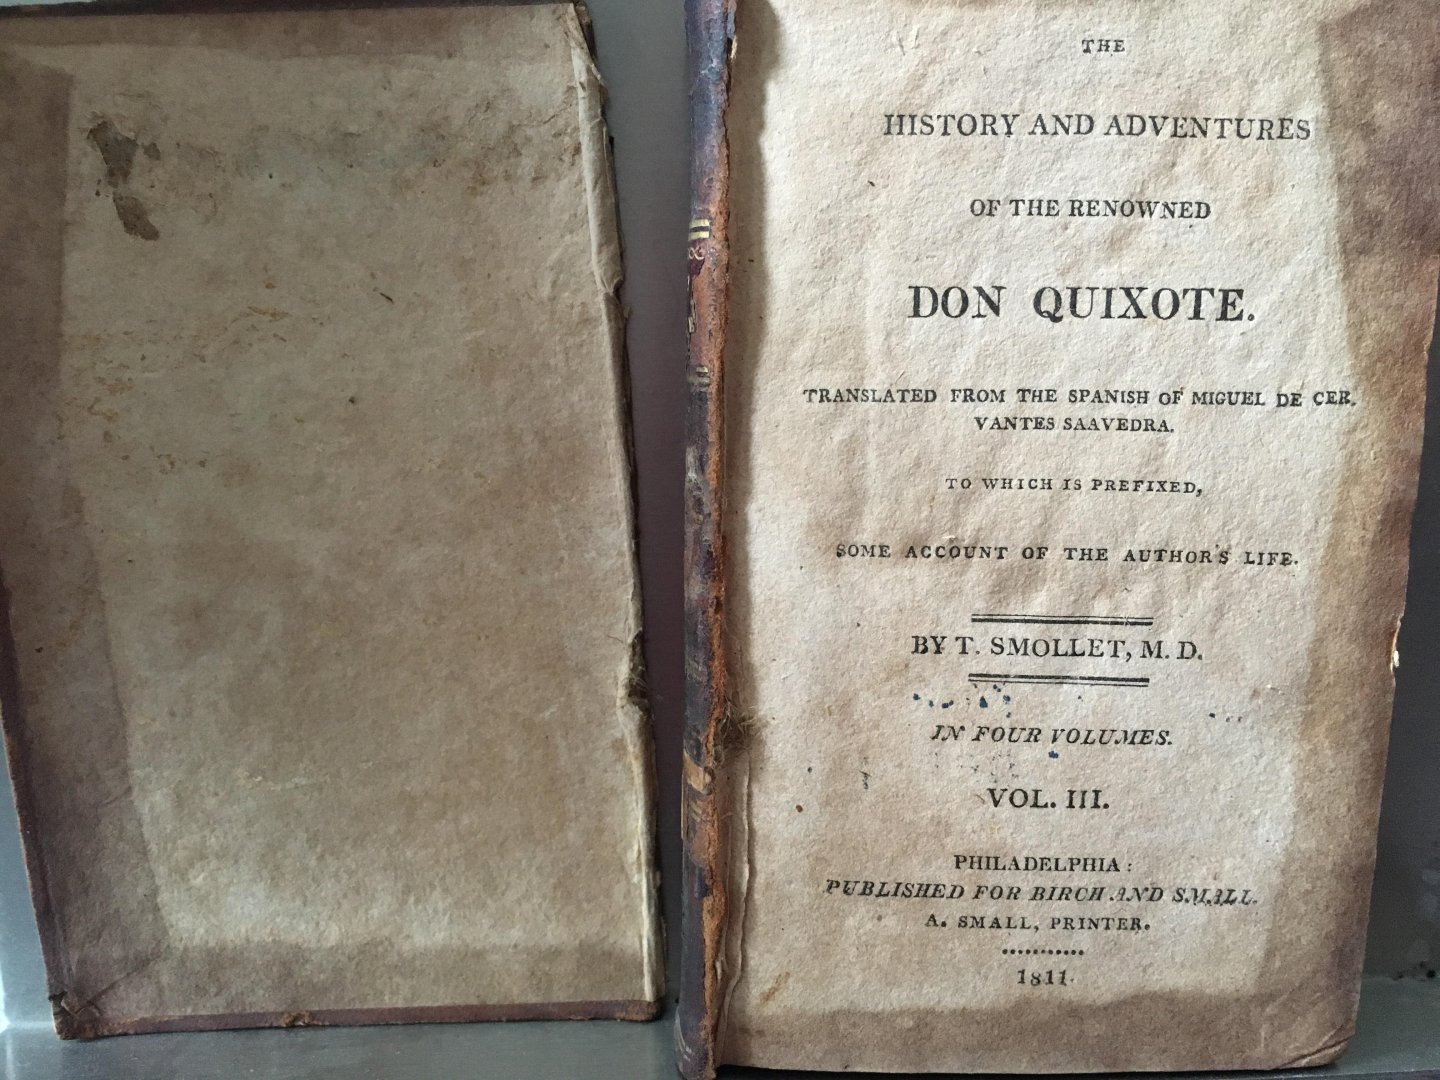 William Paterson, Tes Saavedra, Smollet - History And adventures of the reowned Don Quixote, Translated from the Spanish of Miguel de Cervantes Saavedra